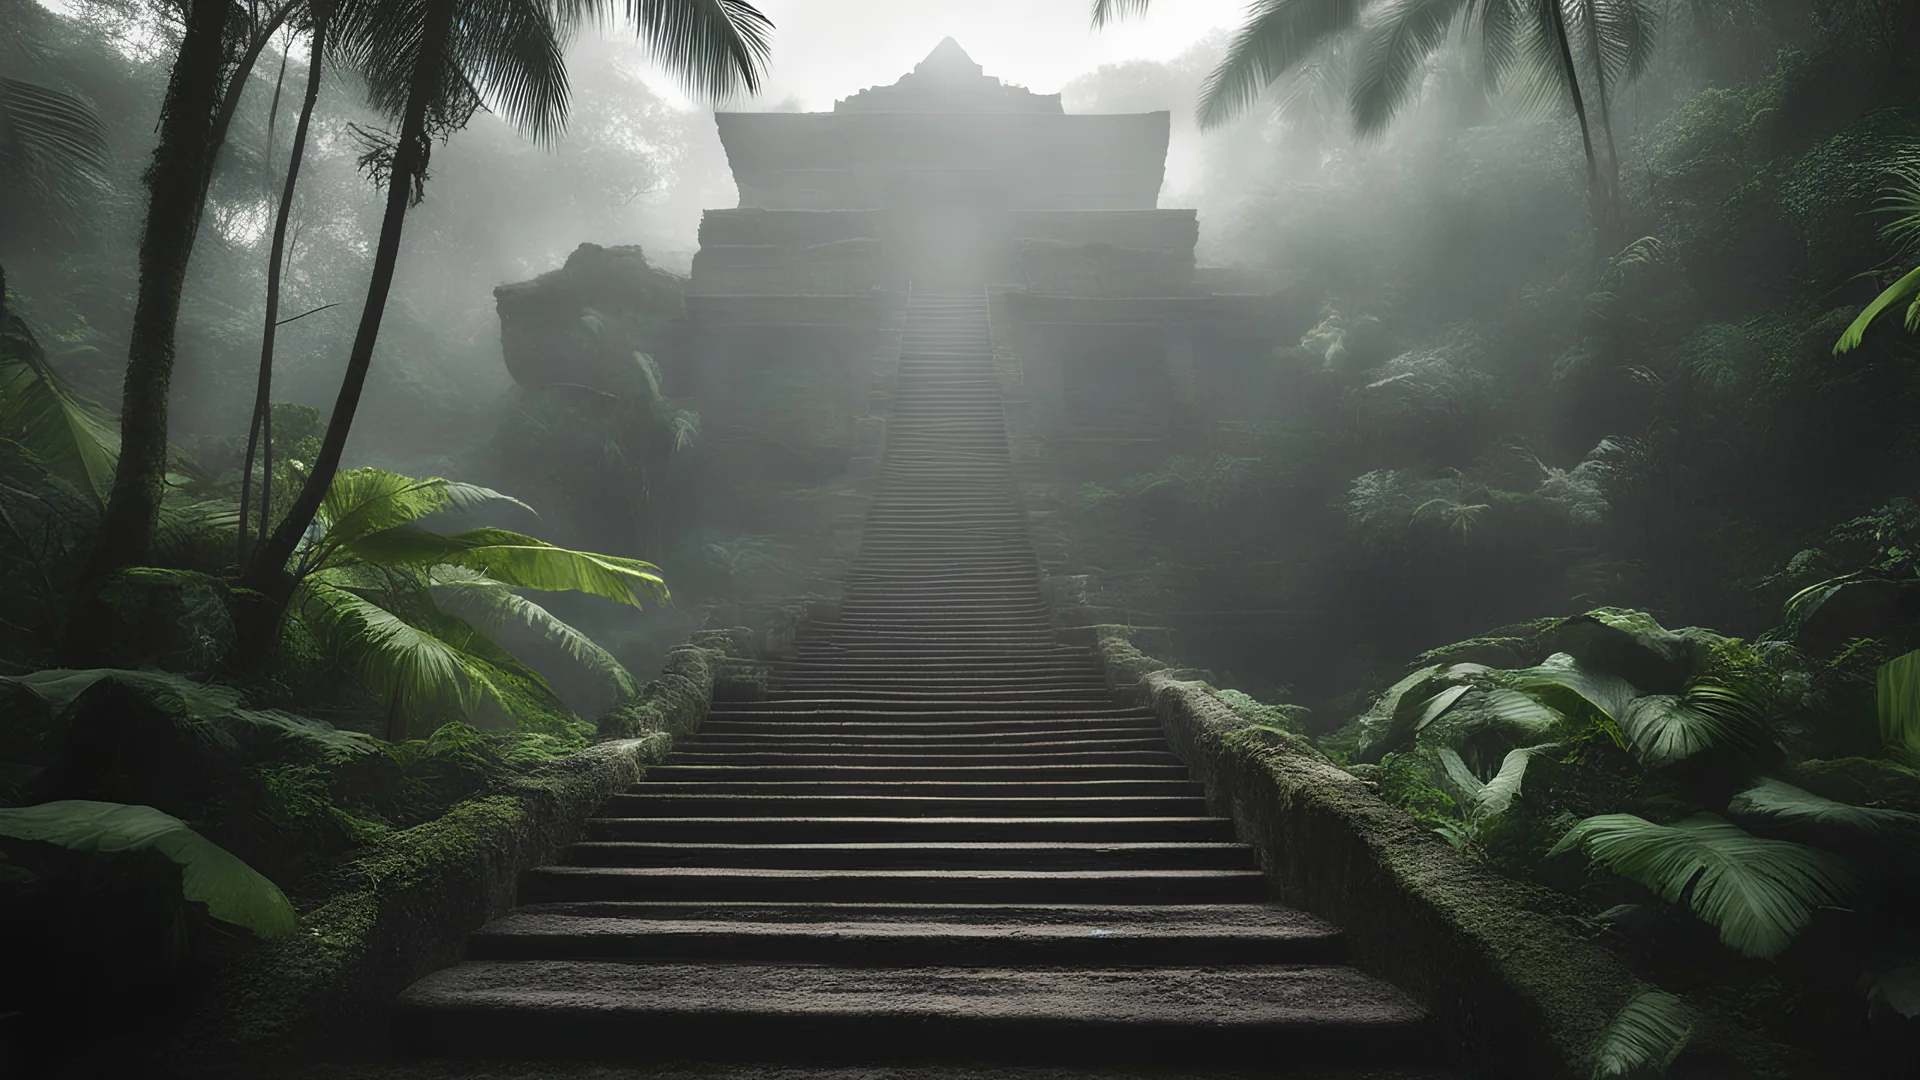 Photoreal magnificent low angle view in the jungle of an enormous water surrounded mayan jungle pyramid with stairs surrounded by a murky moat in a jungle rich environment in morning mist y lee jeffries, otherworldly creature, in the style of fantasy movies, photorealistic, shot on Hasselblad h6d-400c, zeiss prime lens, bokeh like f/0.8, tilt-shift lens 8k, high detail, smooth render, unreal engine 5, cinema 4d, HDR, dust effect, vivid colors